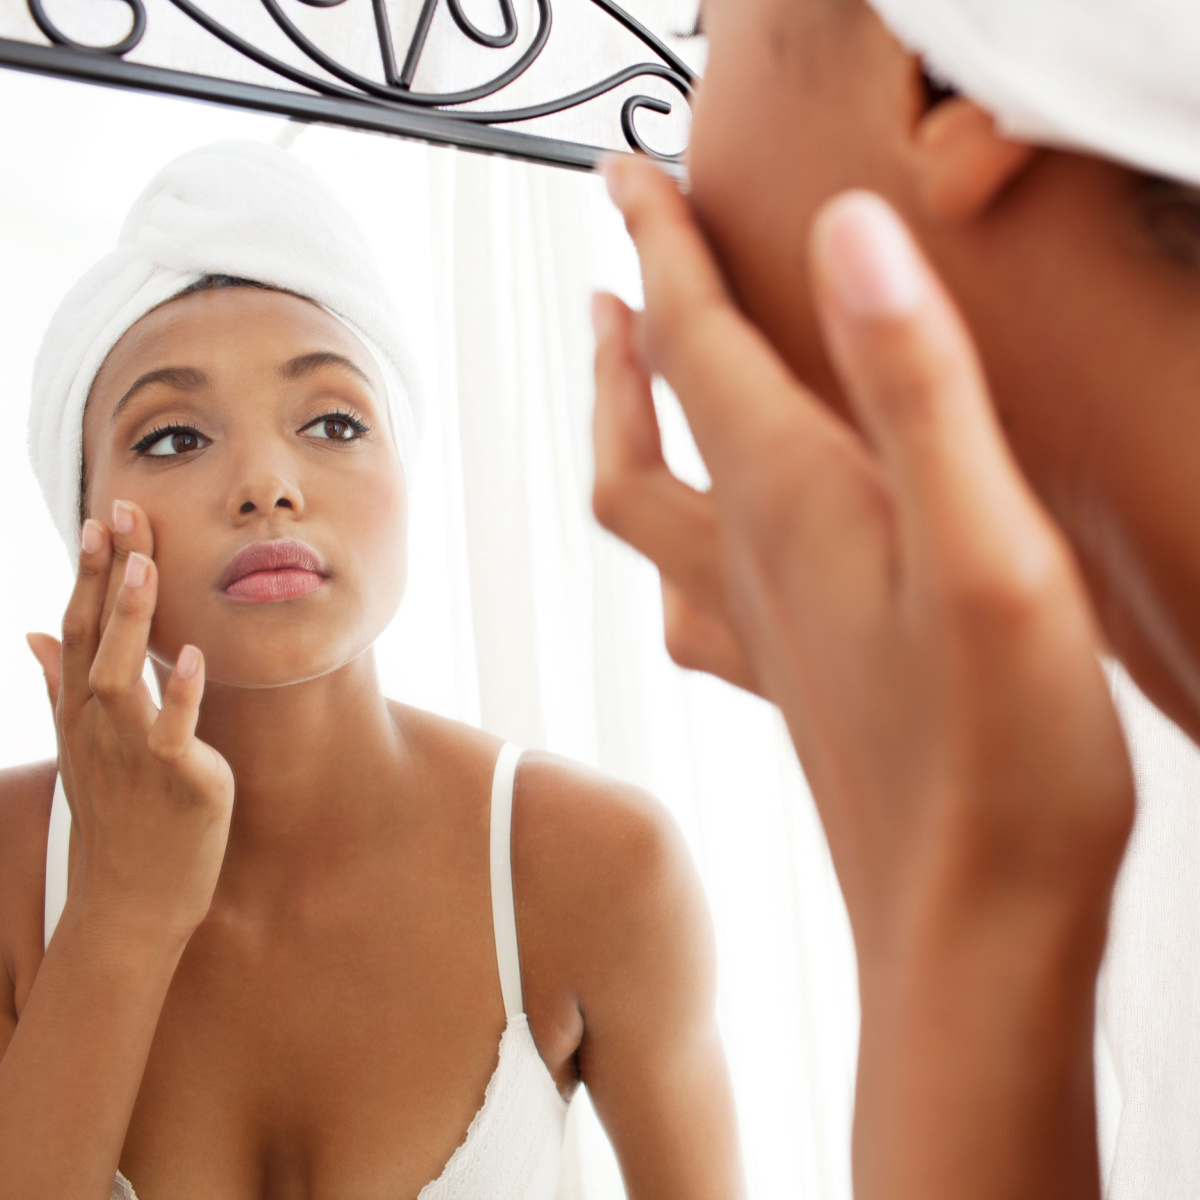 woman touching face in mirror looking white turban